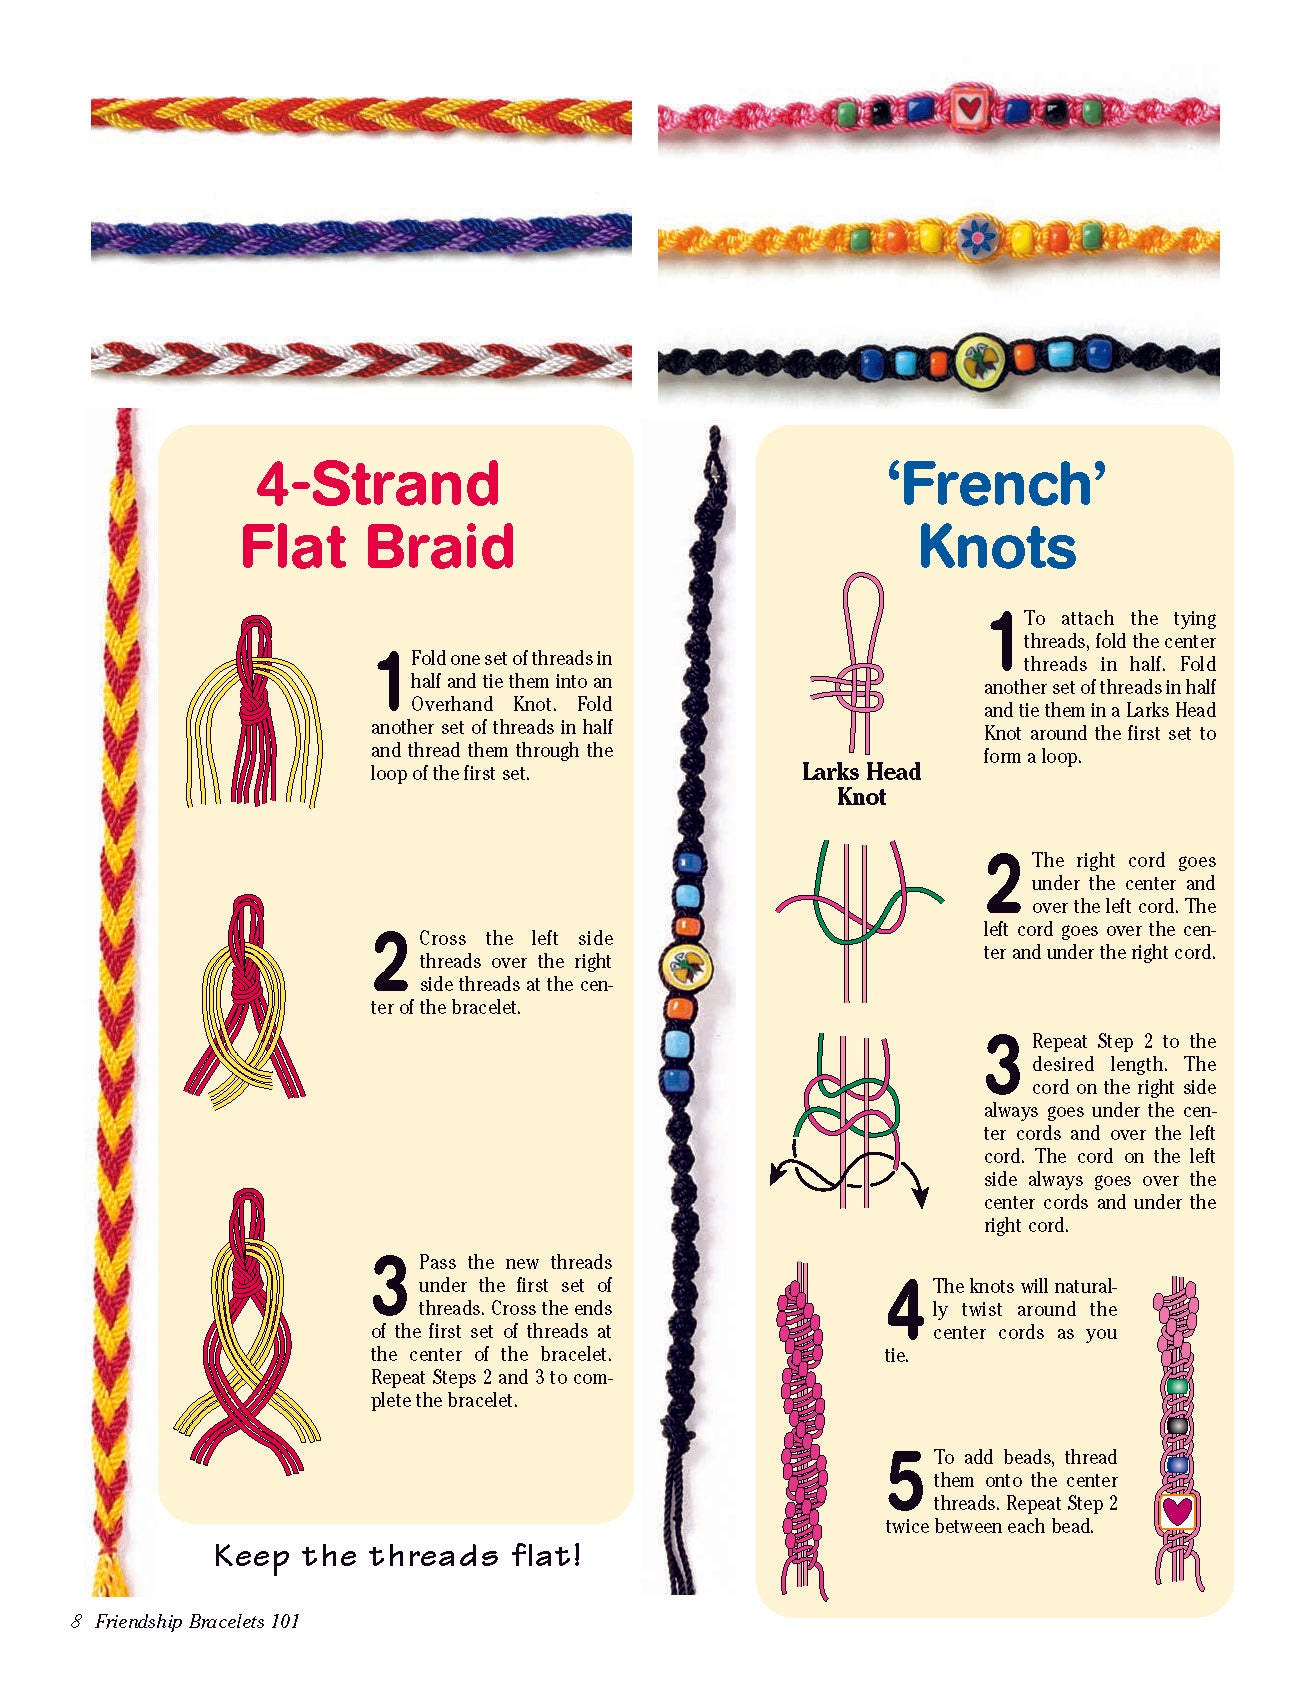 Spiral Braids with 12 to 28 Strands - How Did You Make This? | Luxe DIY